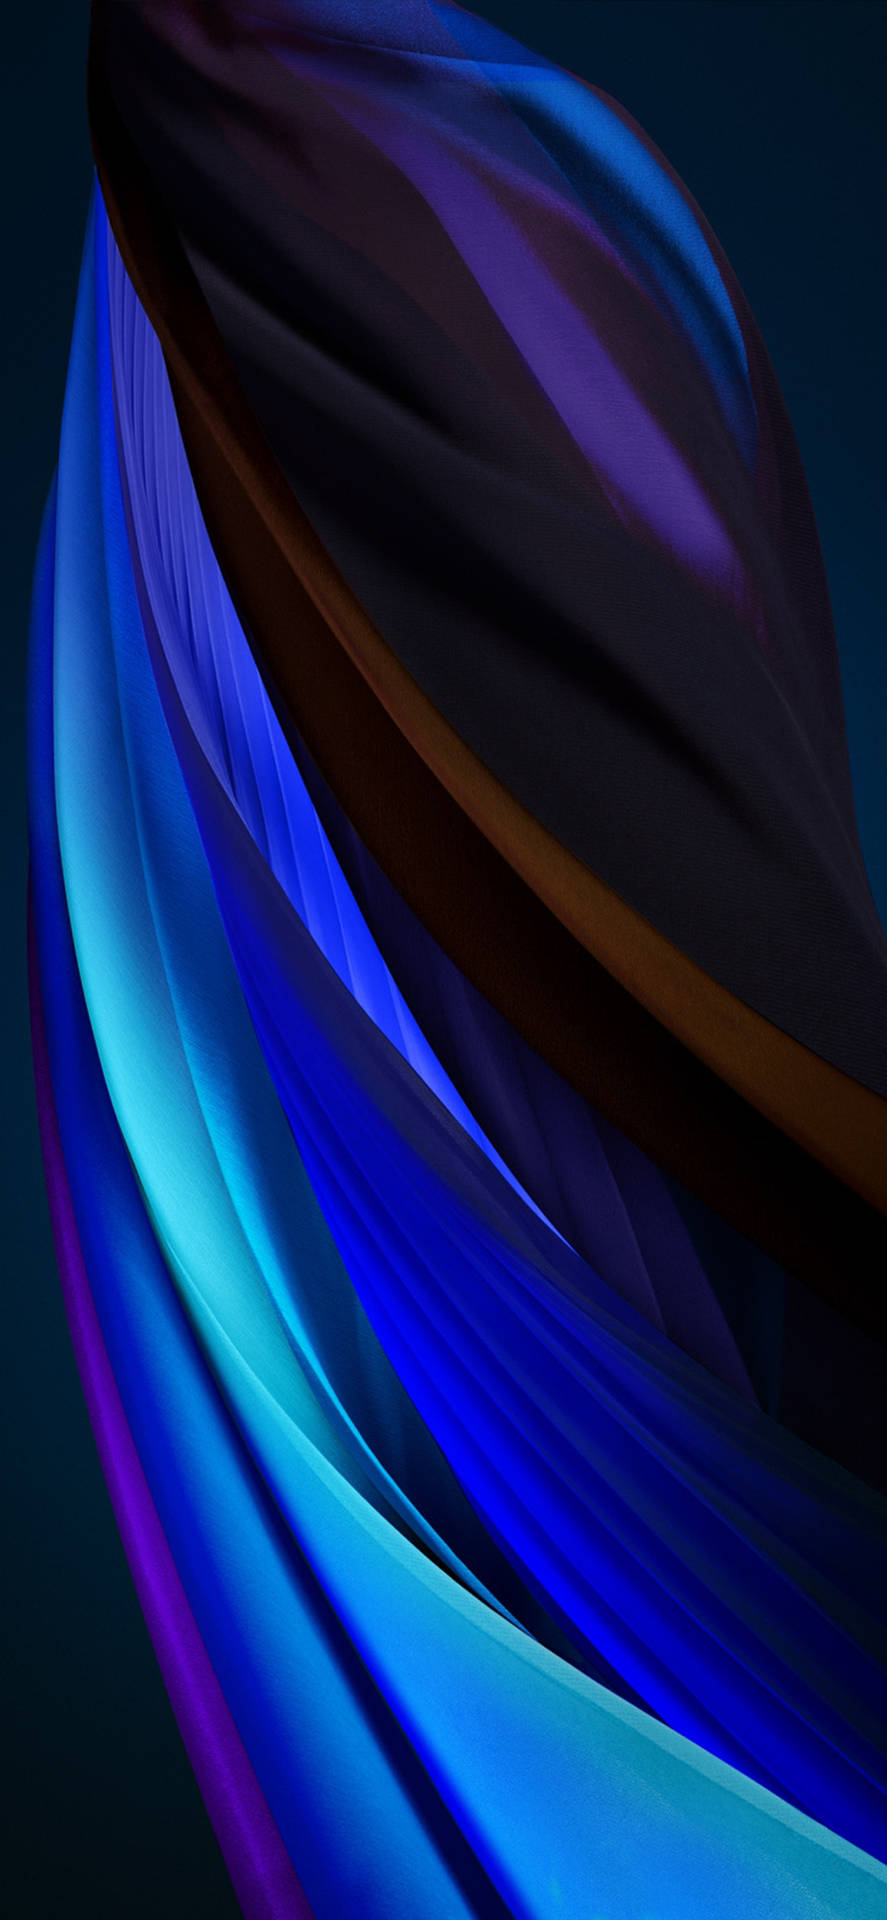 A Blue And Purple Abstract Design On A Black Background Wallpaper